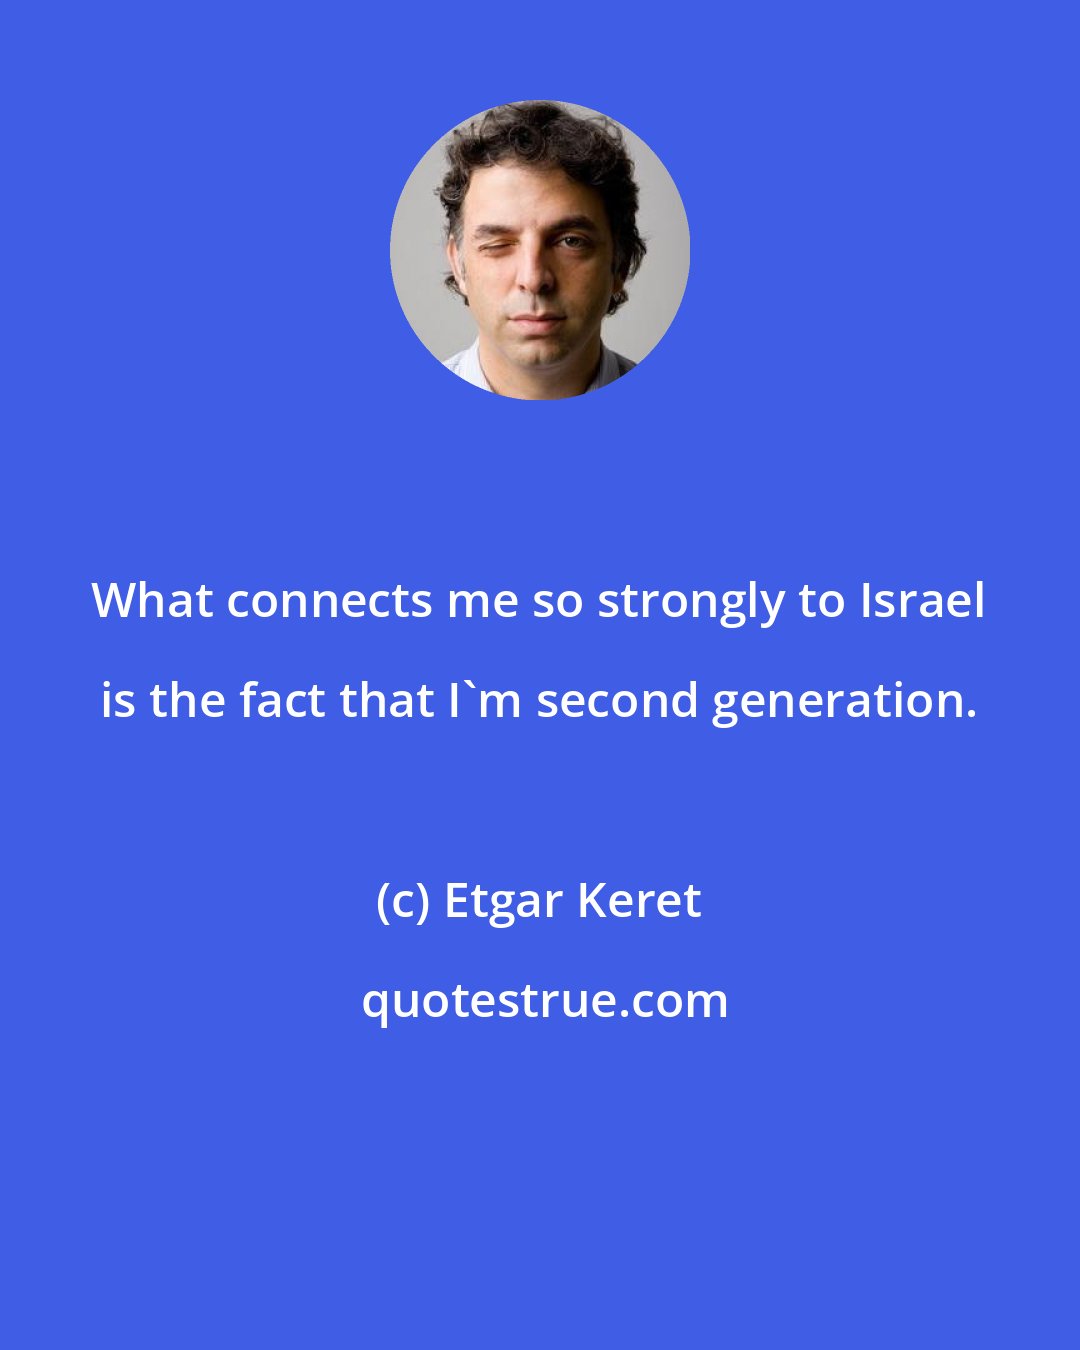 Etgar Keret: What connects me so strongly to Israel is the fact that I'm second generation.